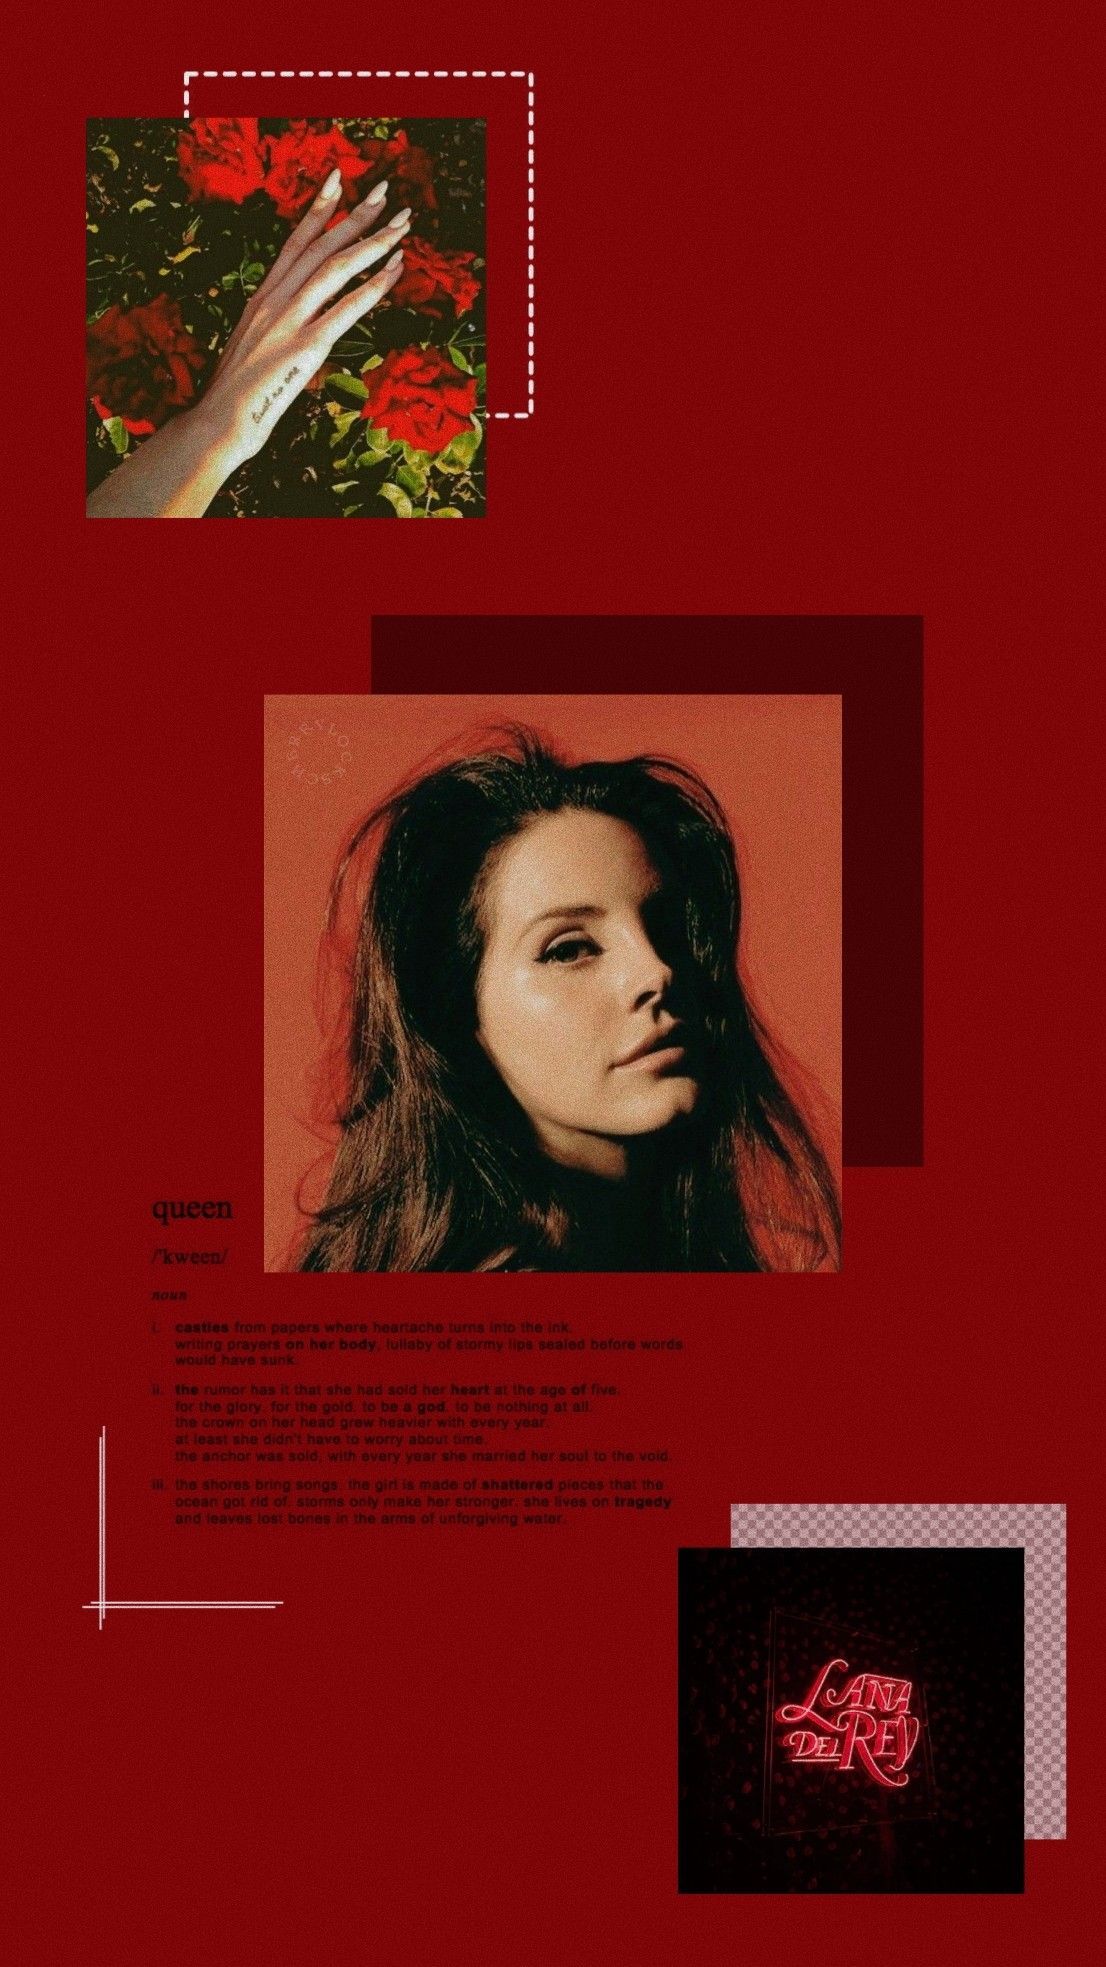 Red aesthetic background with a queen - Lana Del Rey